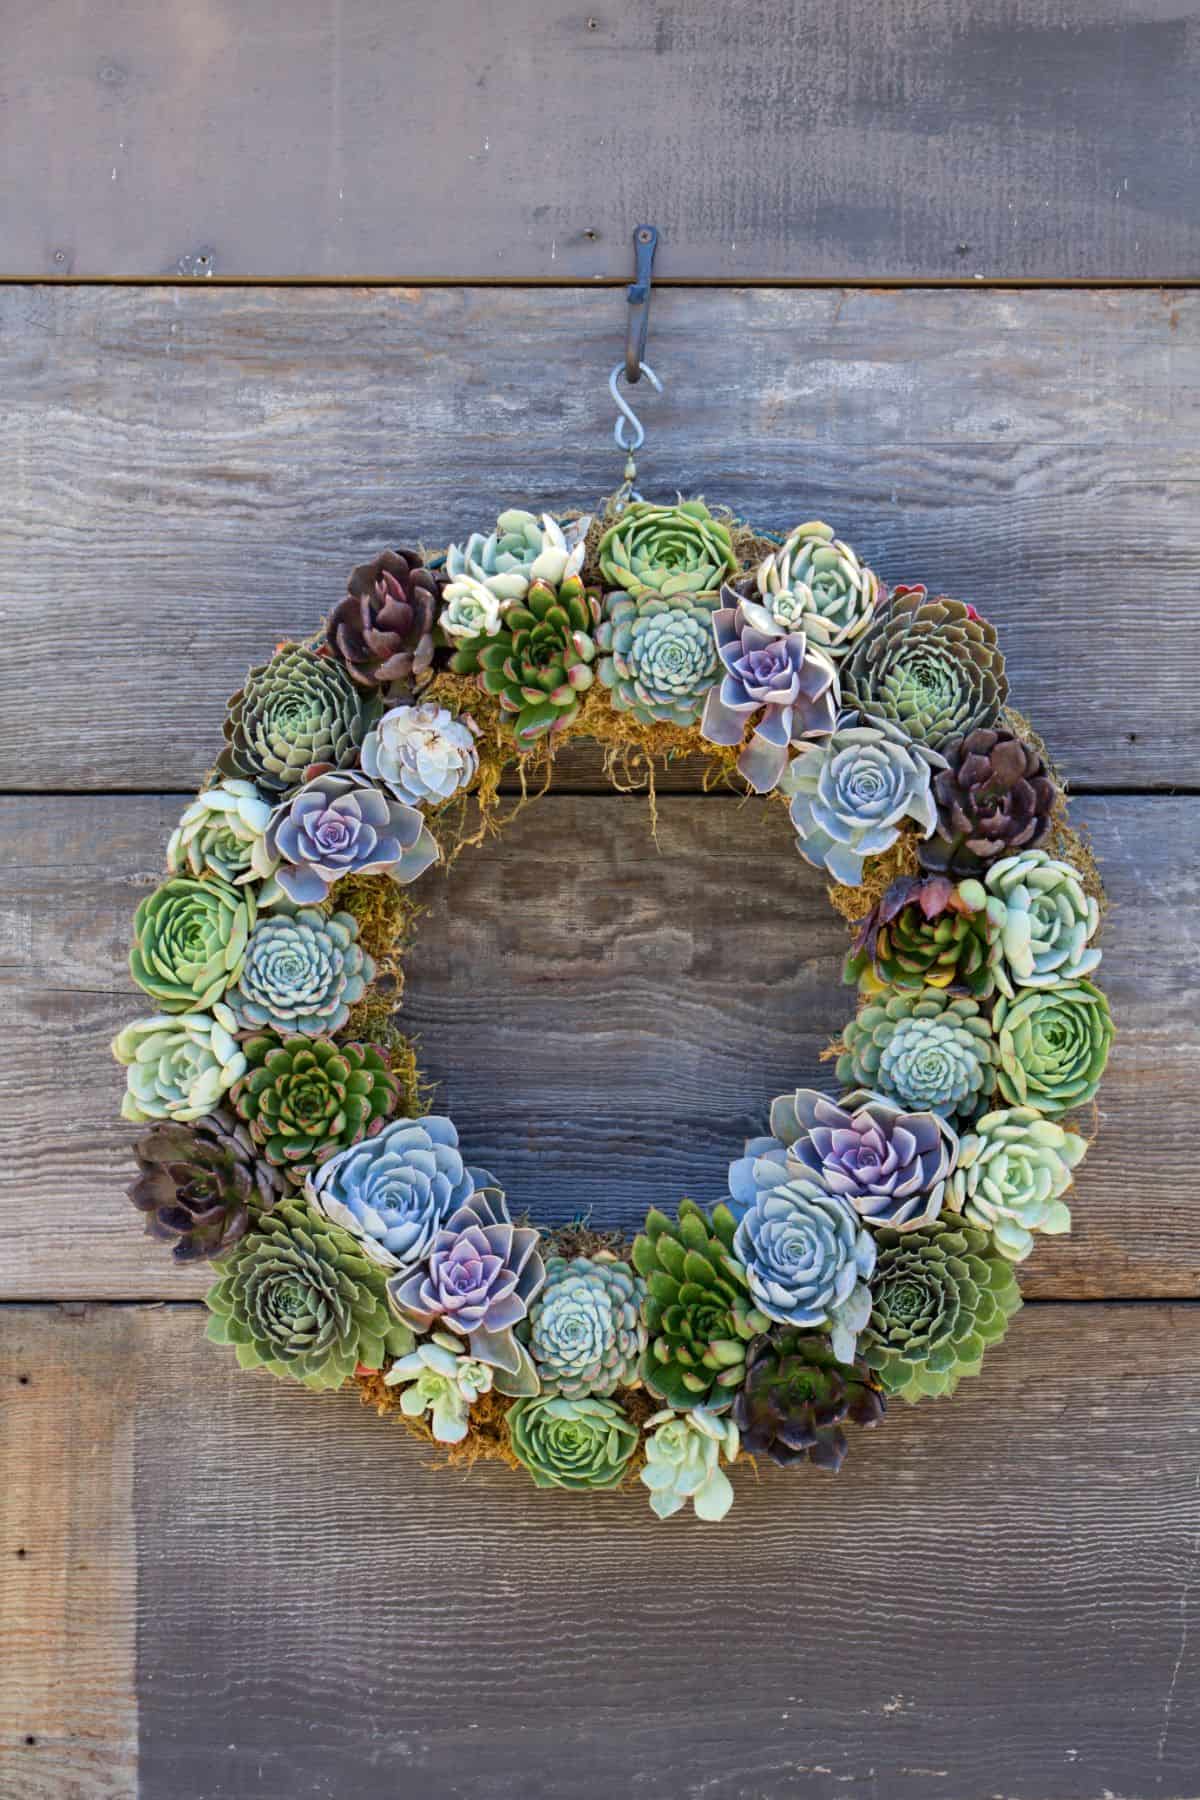 Succulent wreath on the wooden table.